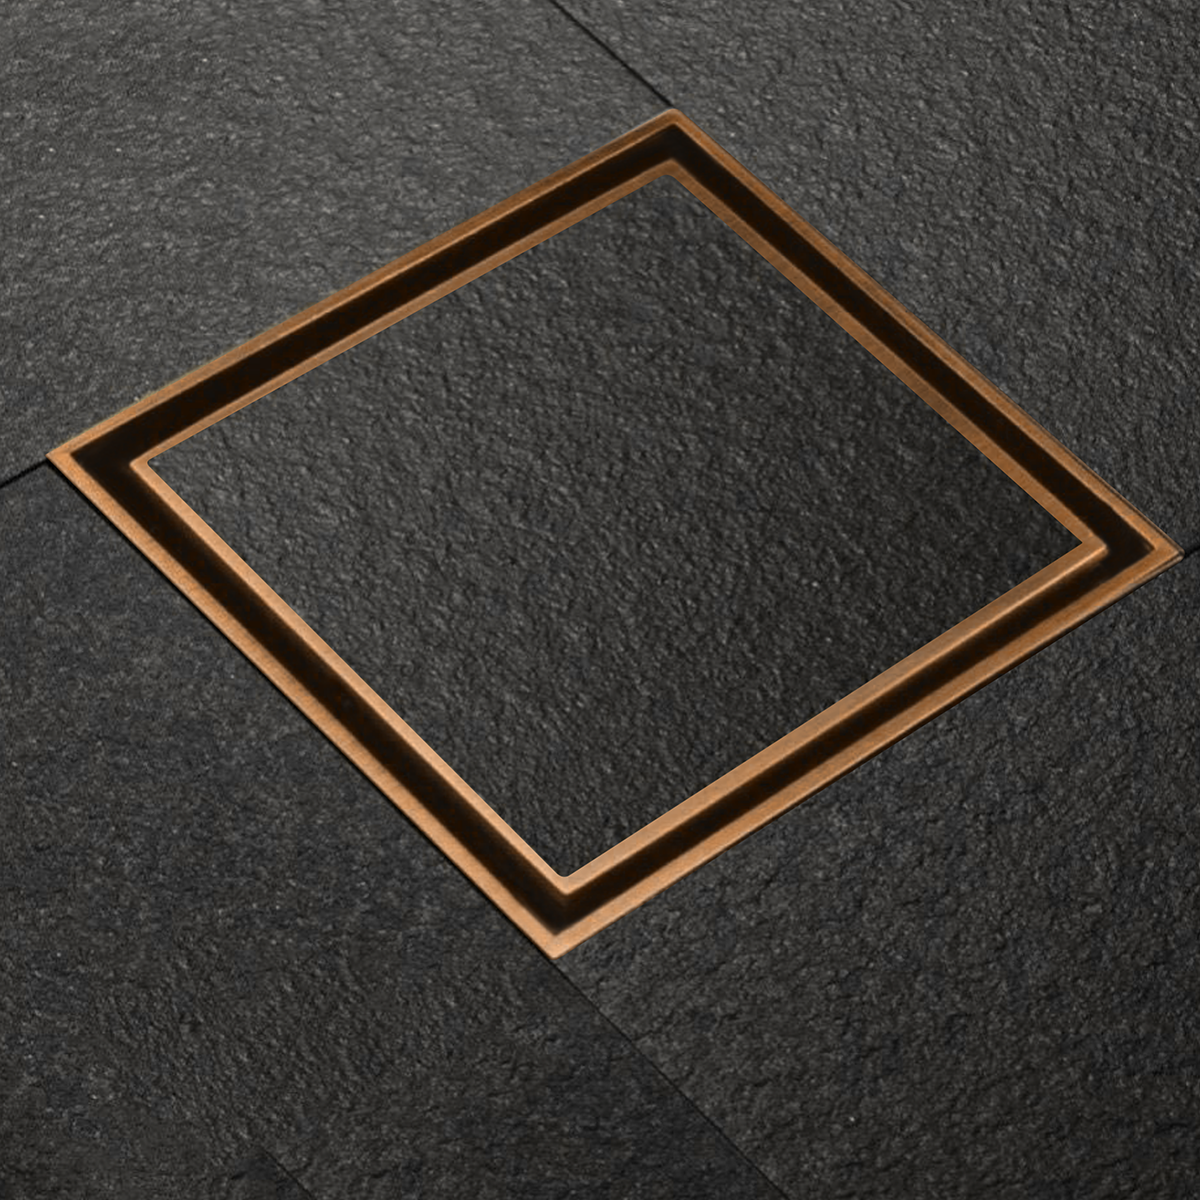 Tile Insert Shower Drain Channel (4 x 4 Inches) ROSE GOLD PVD Coated - by Ruhe®